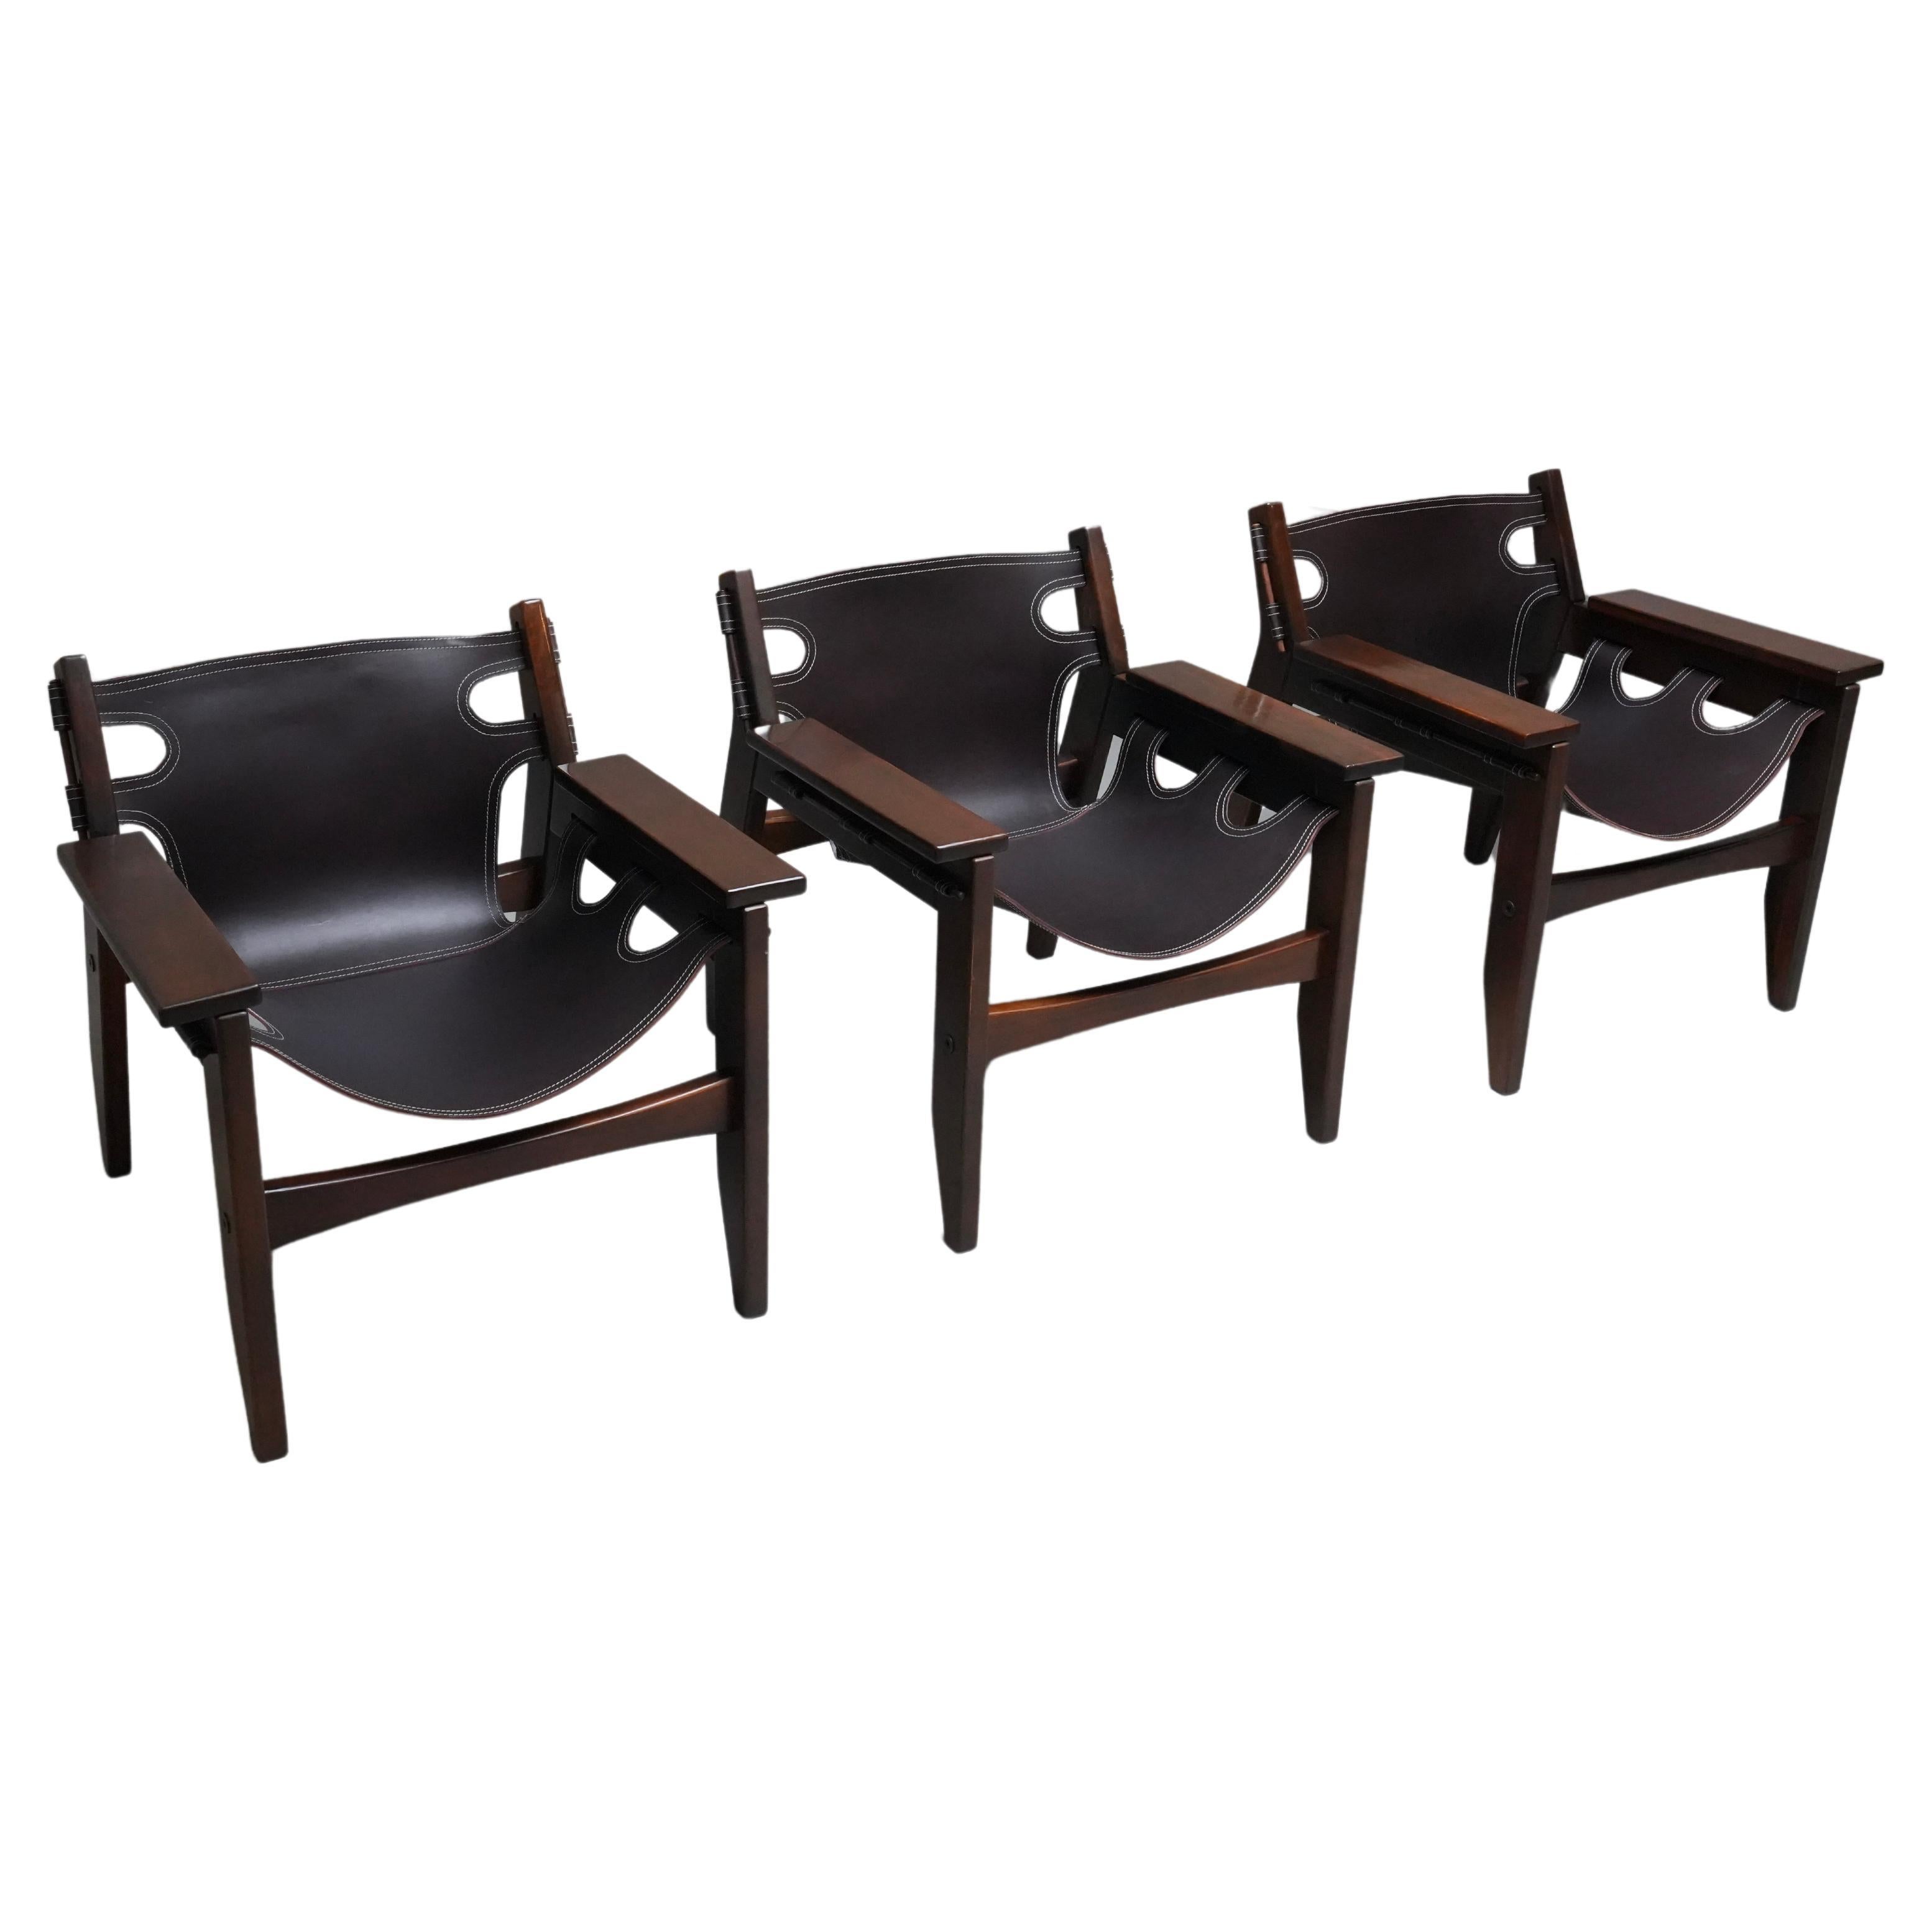 Sergio Rodrigues ‘Kilin' Lounge Chairs. set of three, Brasil, 1970s For Sale